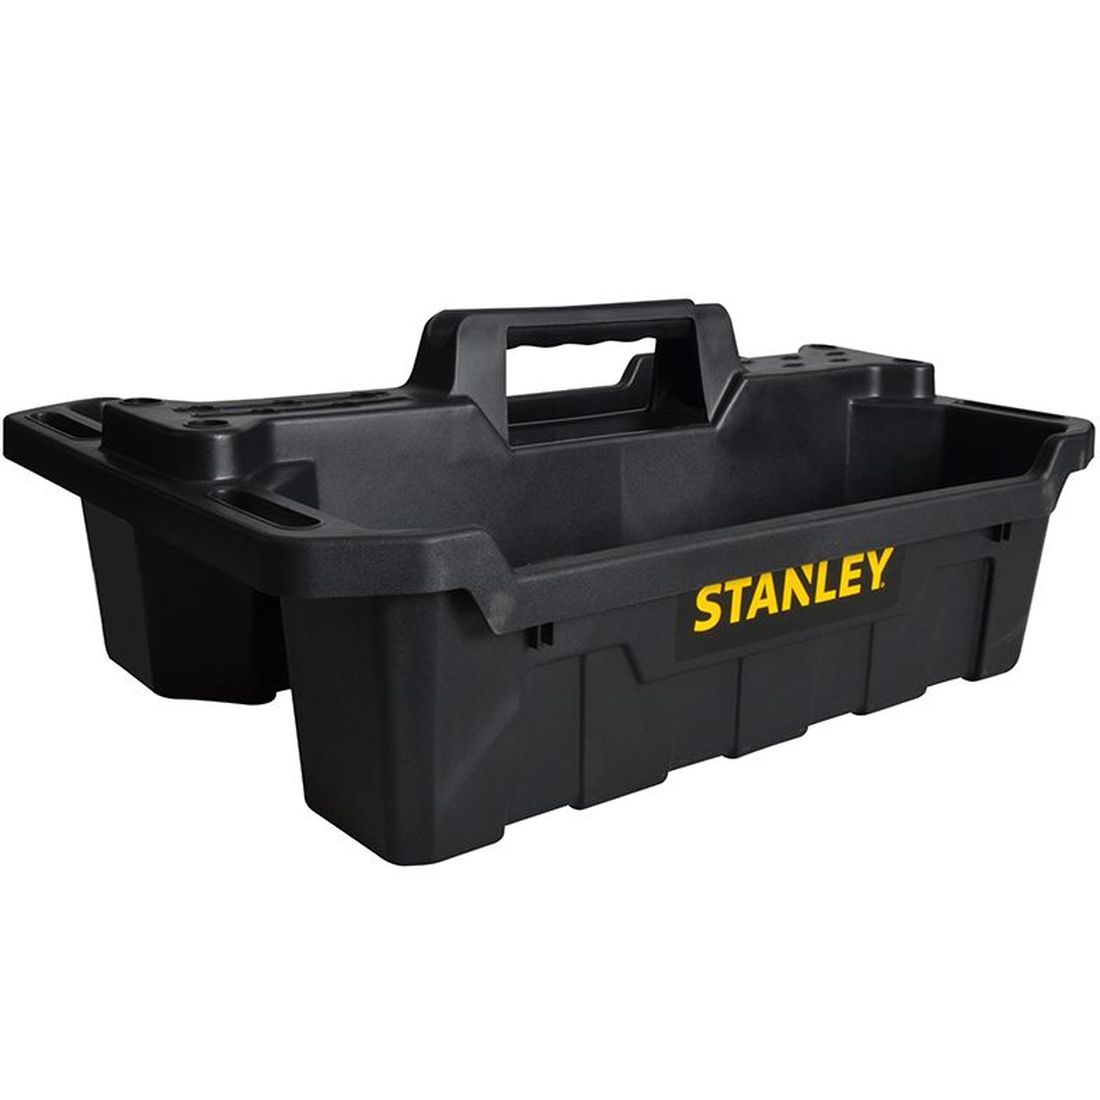 STANLEY Plastic Tote Tray                 